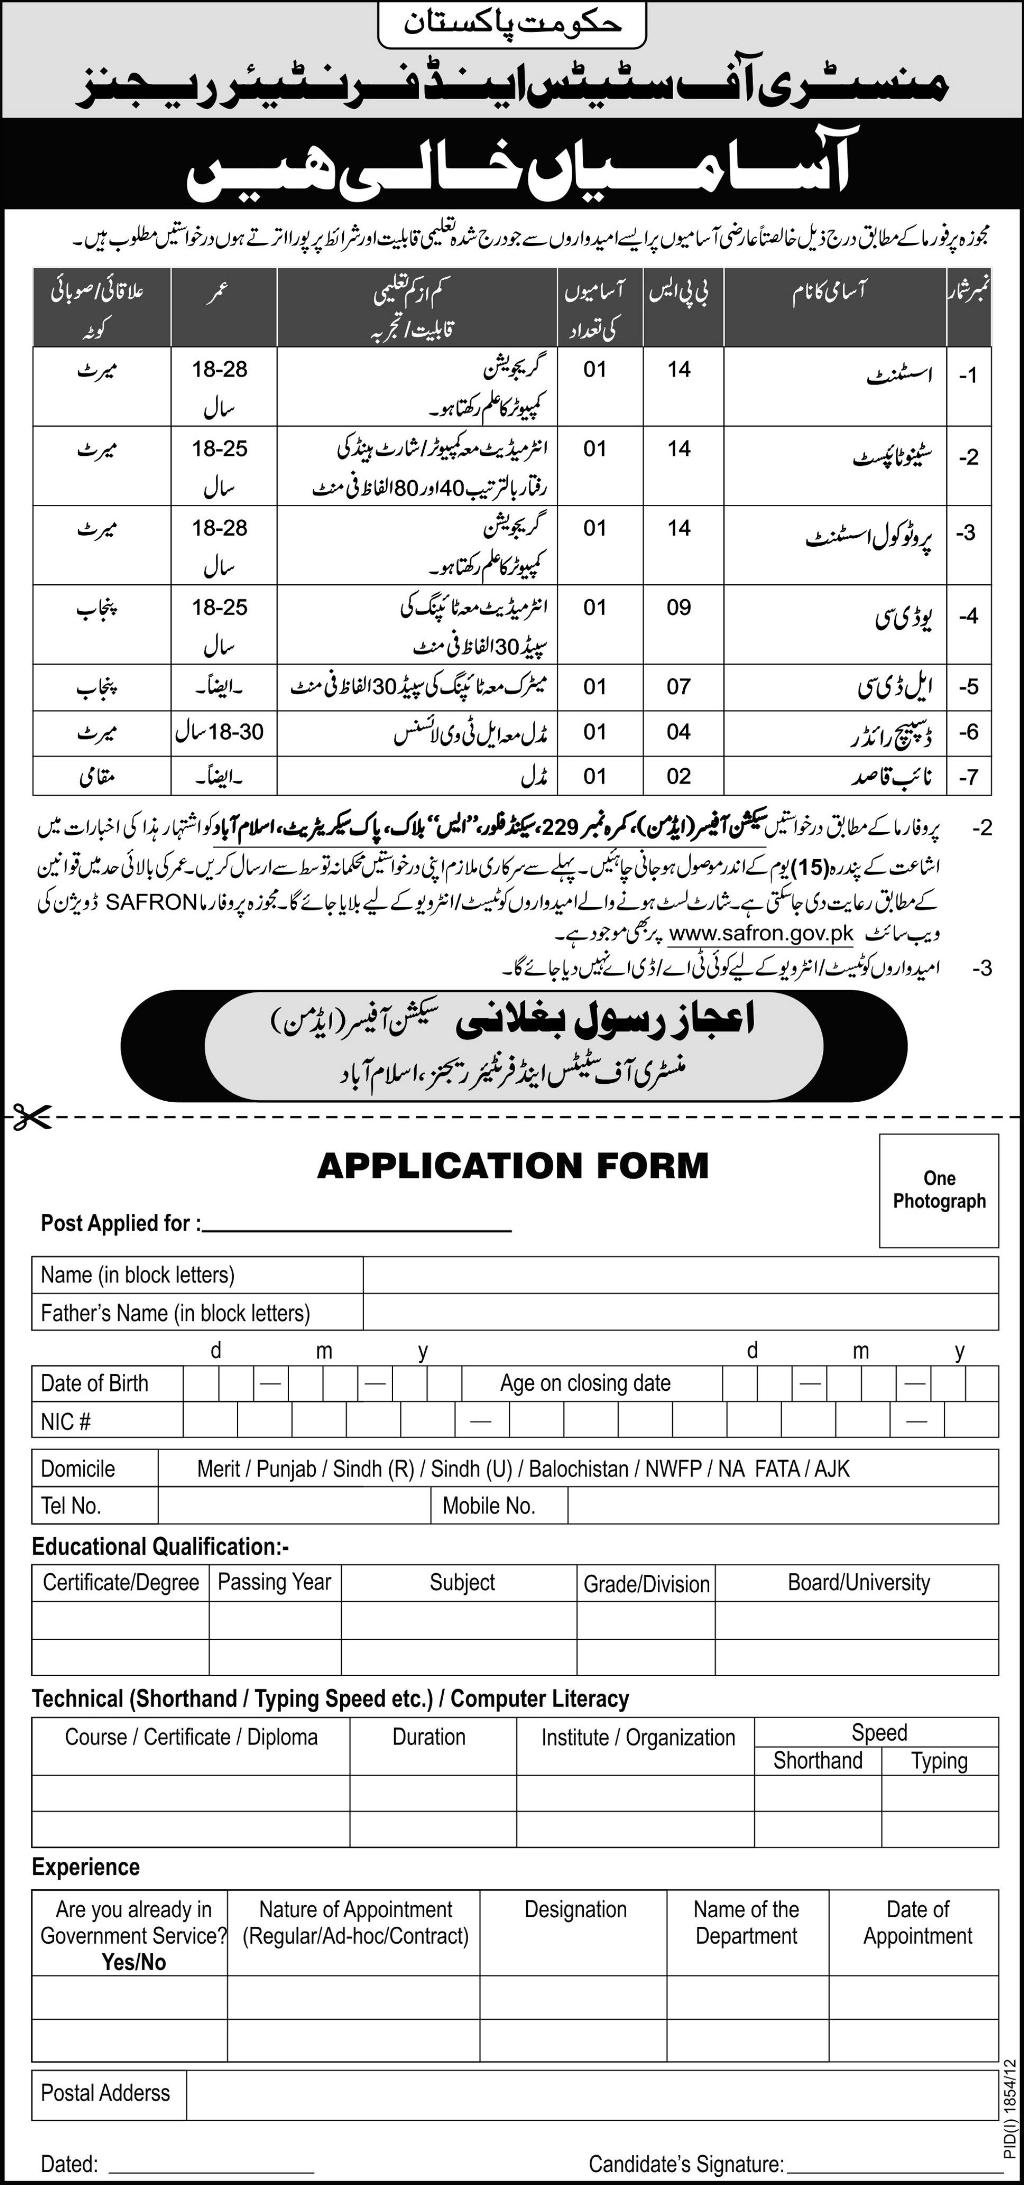 Ministry of States and Frontier Regions SAFRON Jobs (Government Jobs)